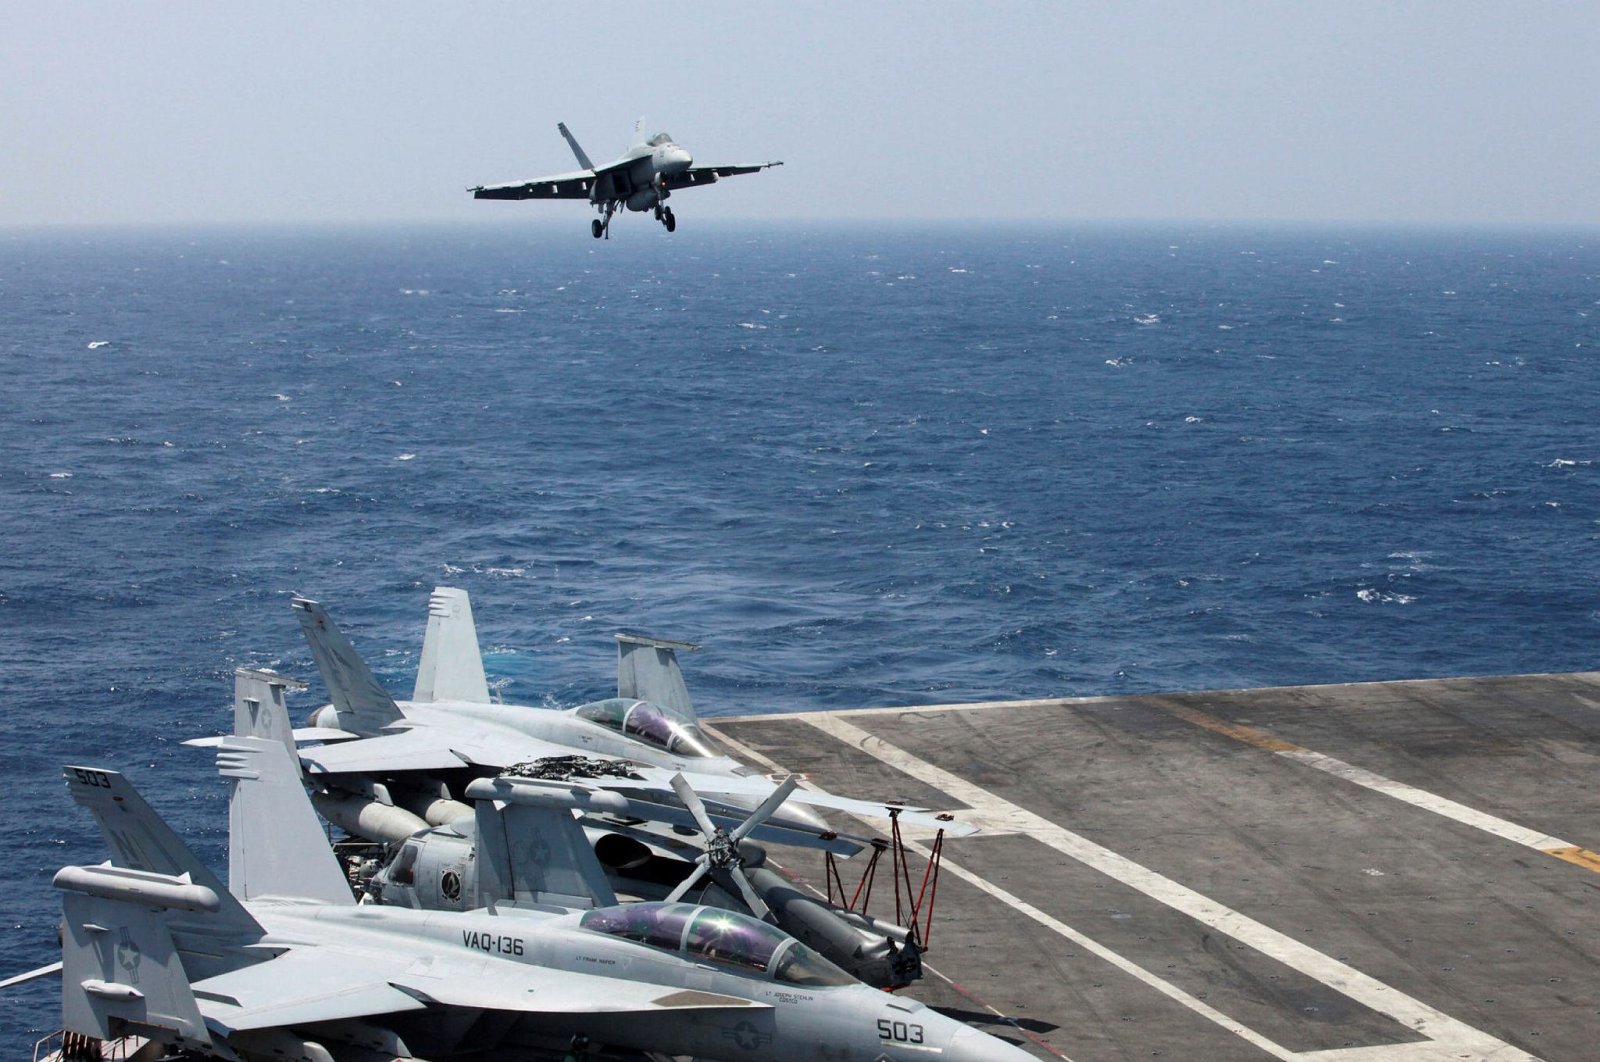 An F-18 fighter jet lands on the U.S Navy aircraft carrier USS Carl Vinson (CVN 70) following a patrol of the disputed South China Sea, March 3, 2017. (AP Photo)